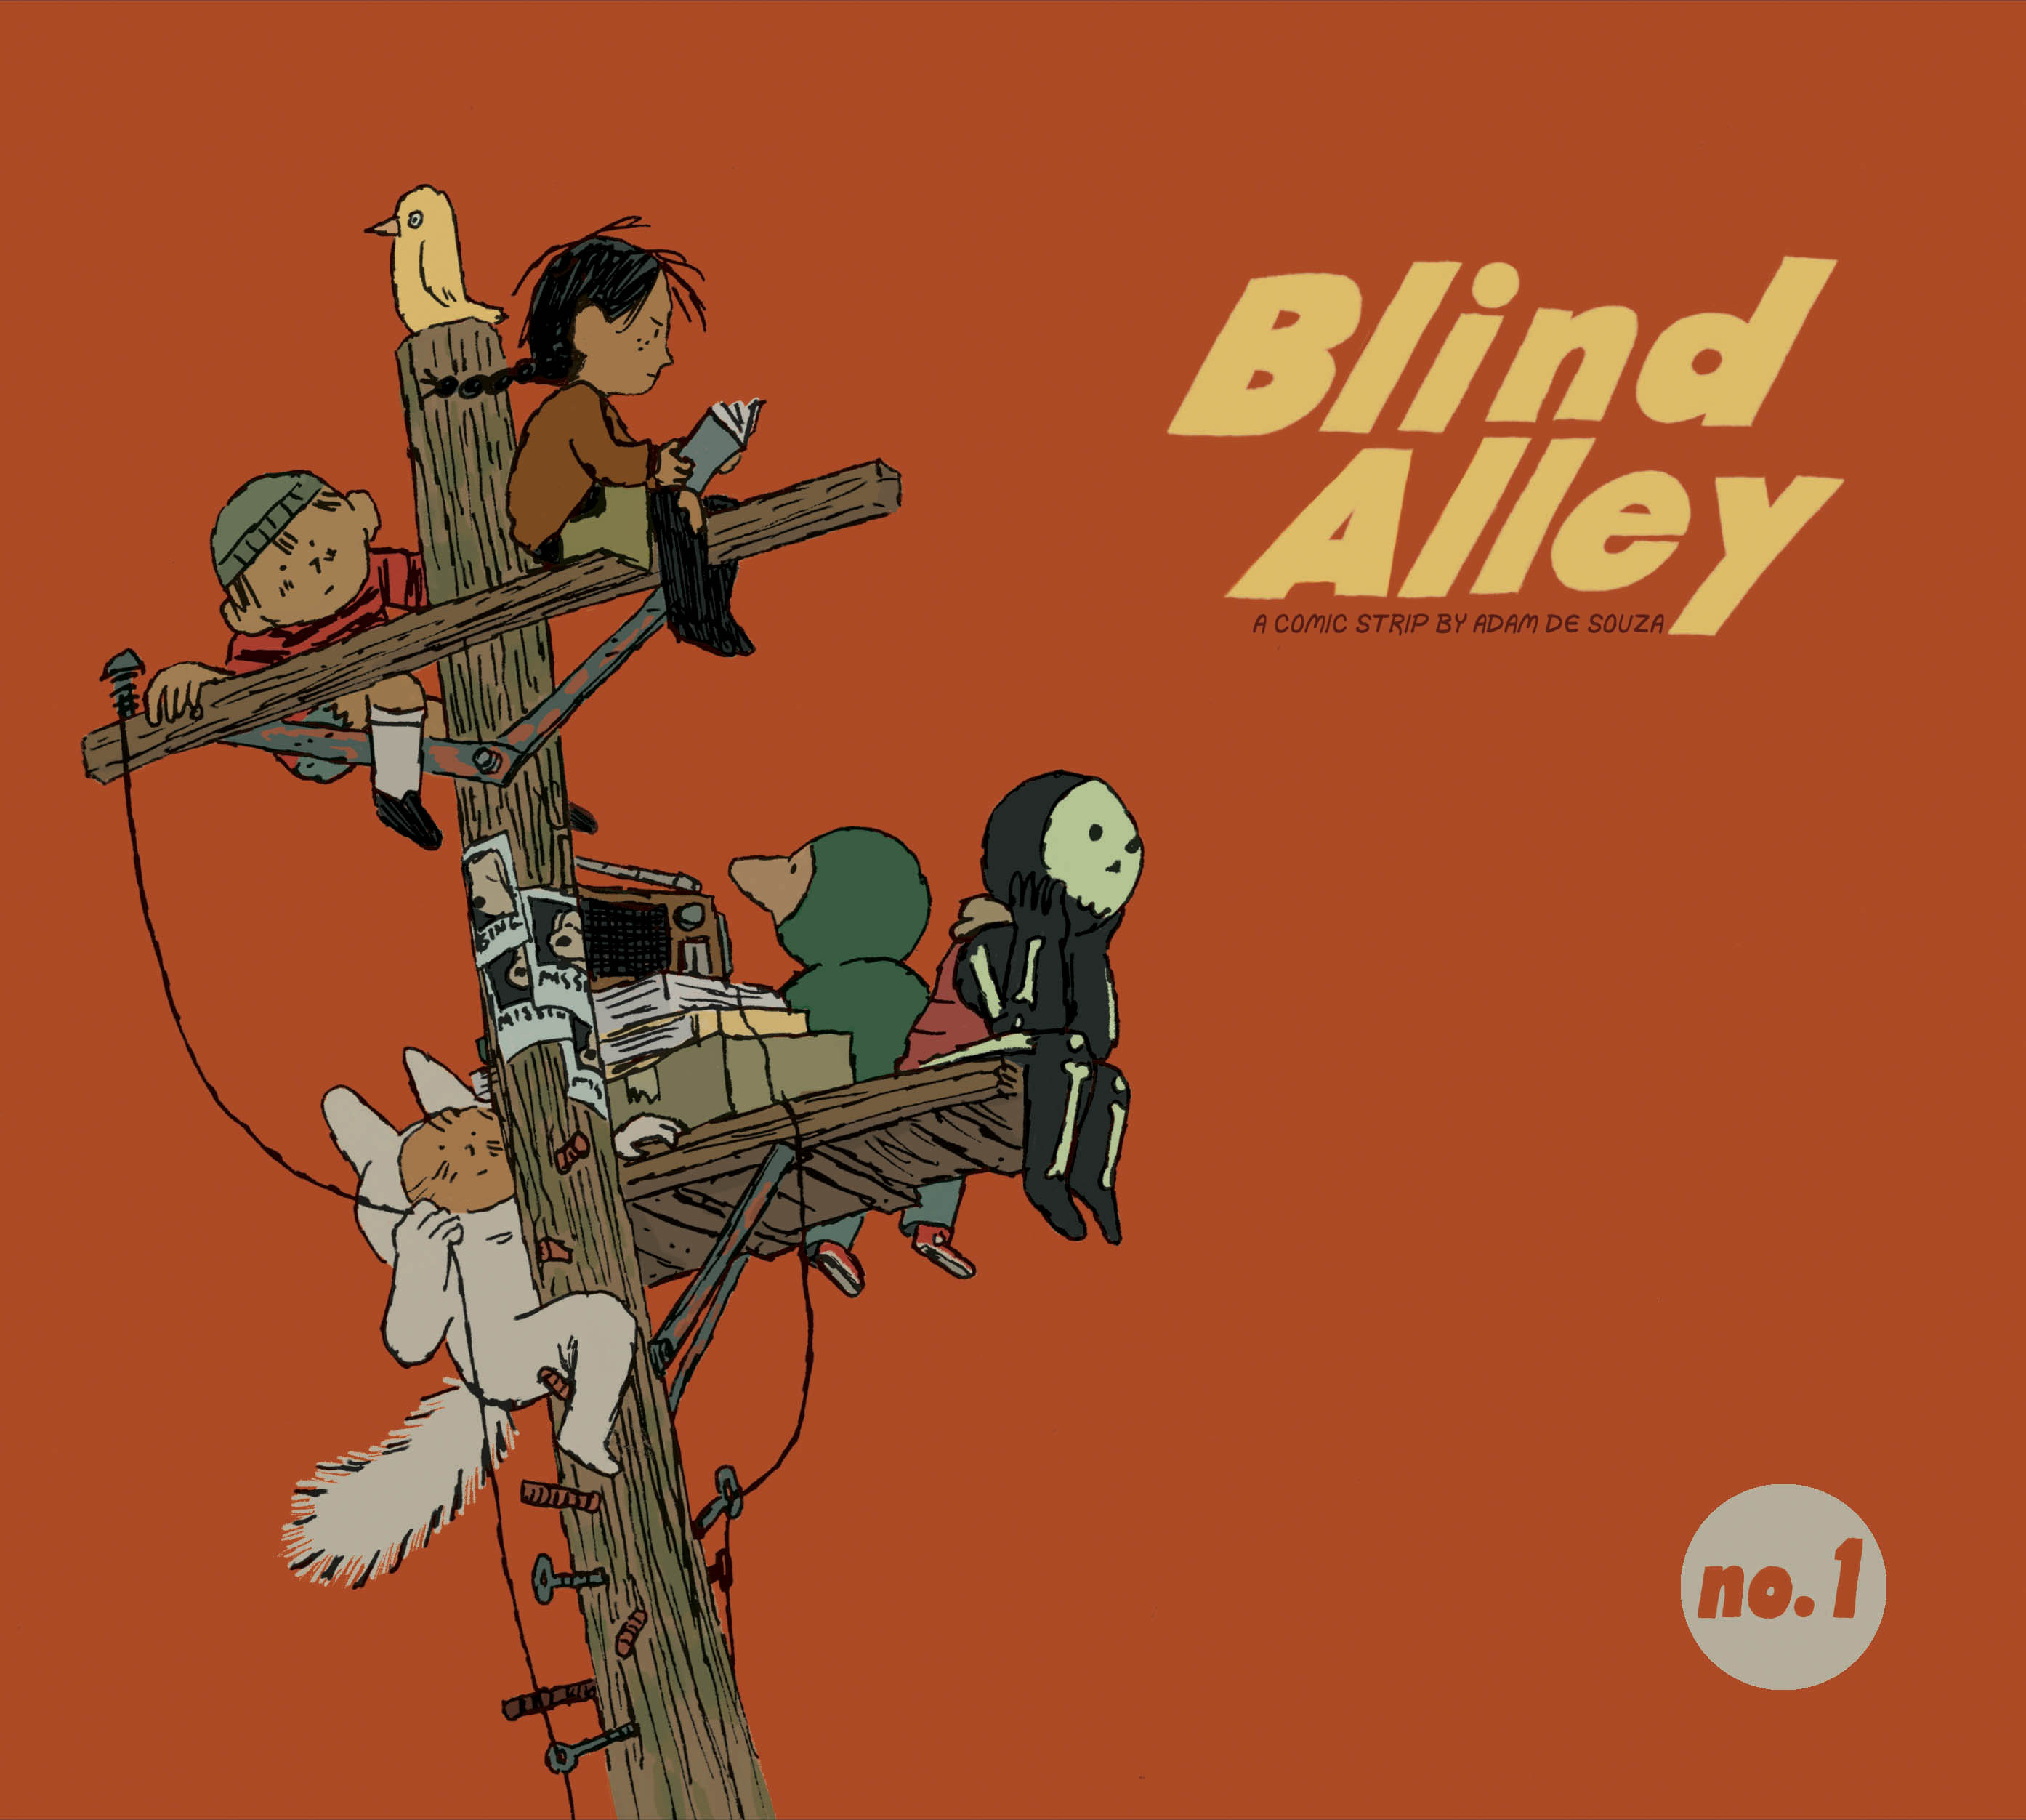 Blind alley comic